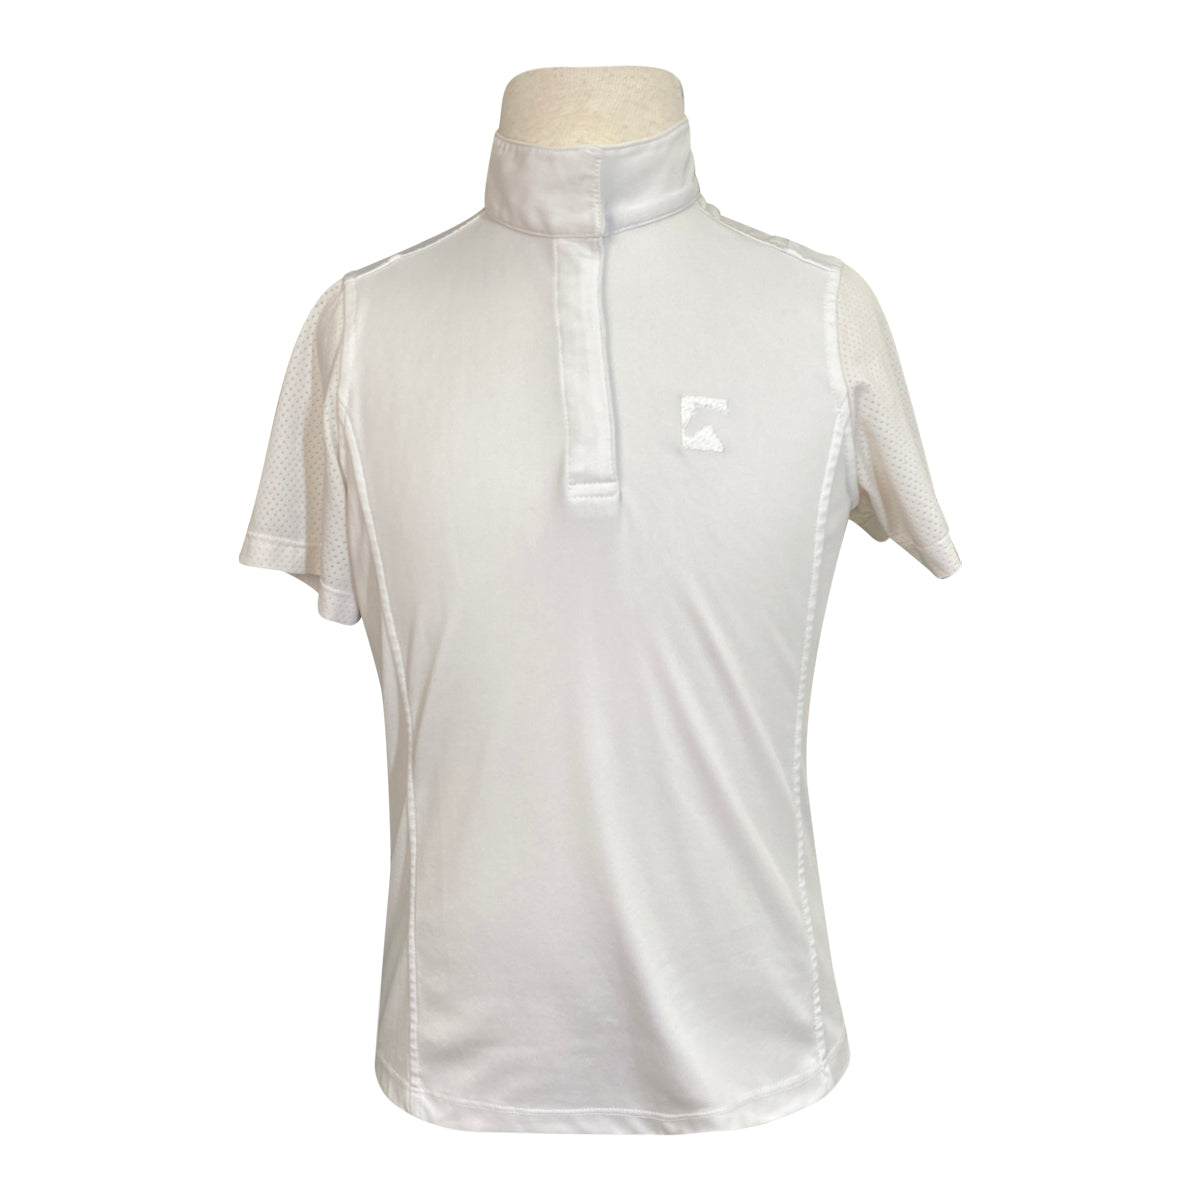 Riding Sport Essential Short Sleeve Show Shirt in White